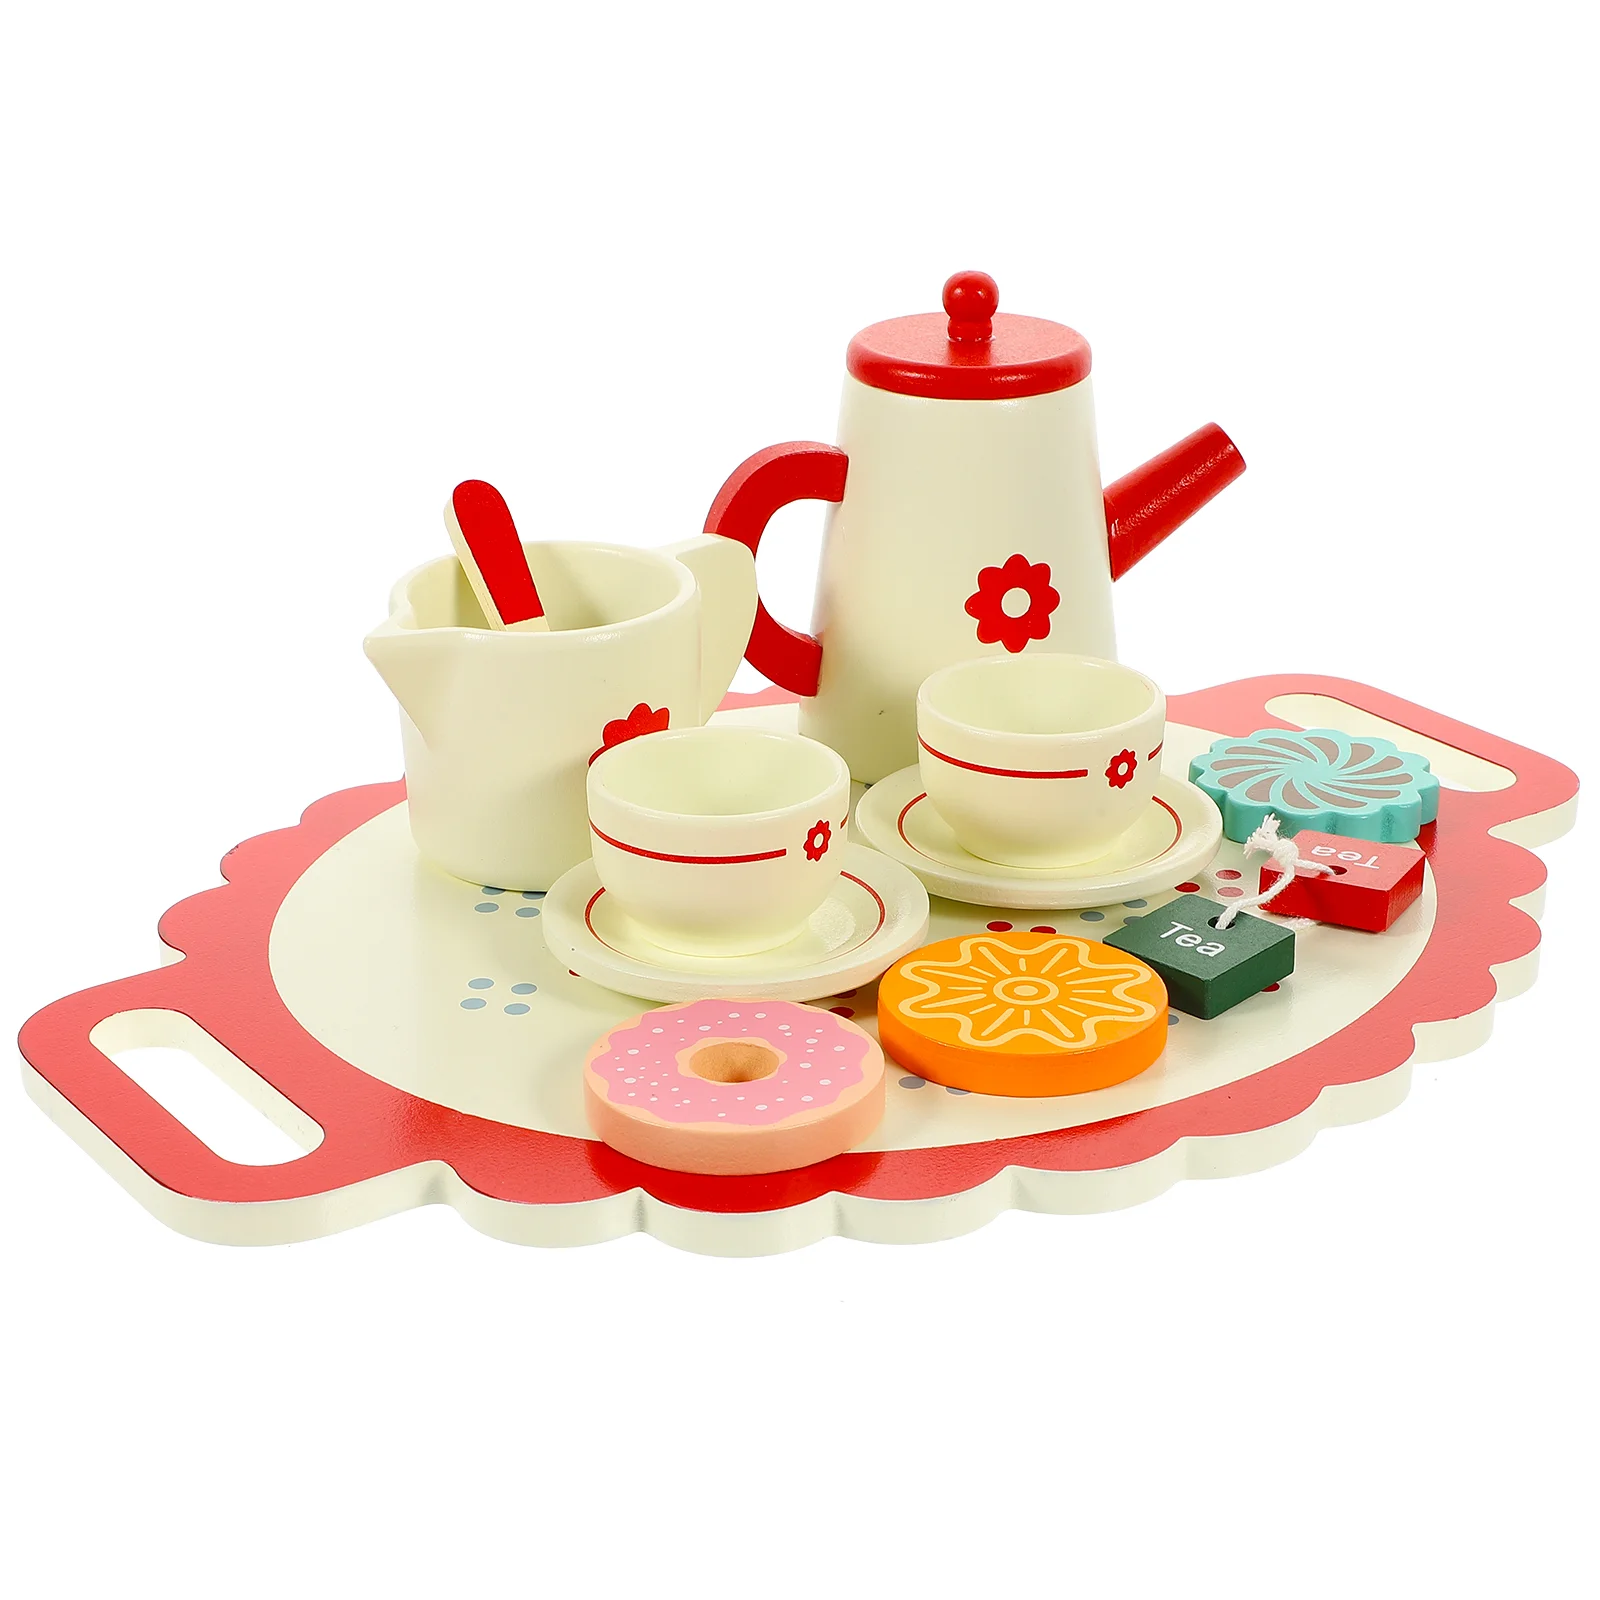 

Simulation Tea Set Wood Teaware Toddler Miniature Puzzle Tiny Ornaments Afternoon Making Toys Wooden Kids Tableware Child